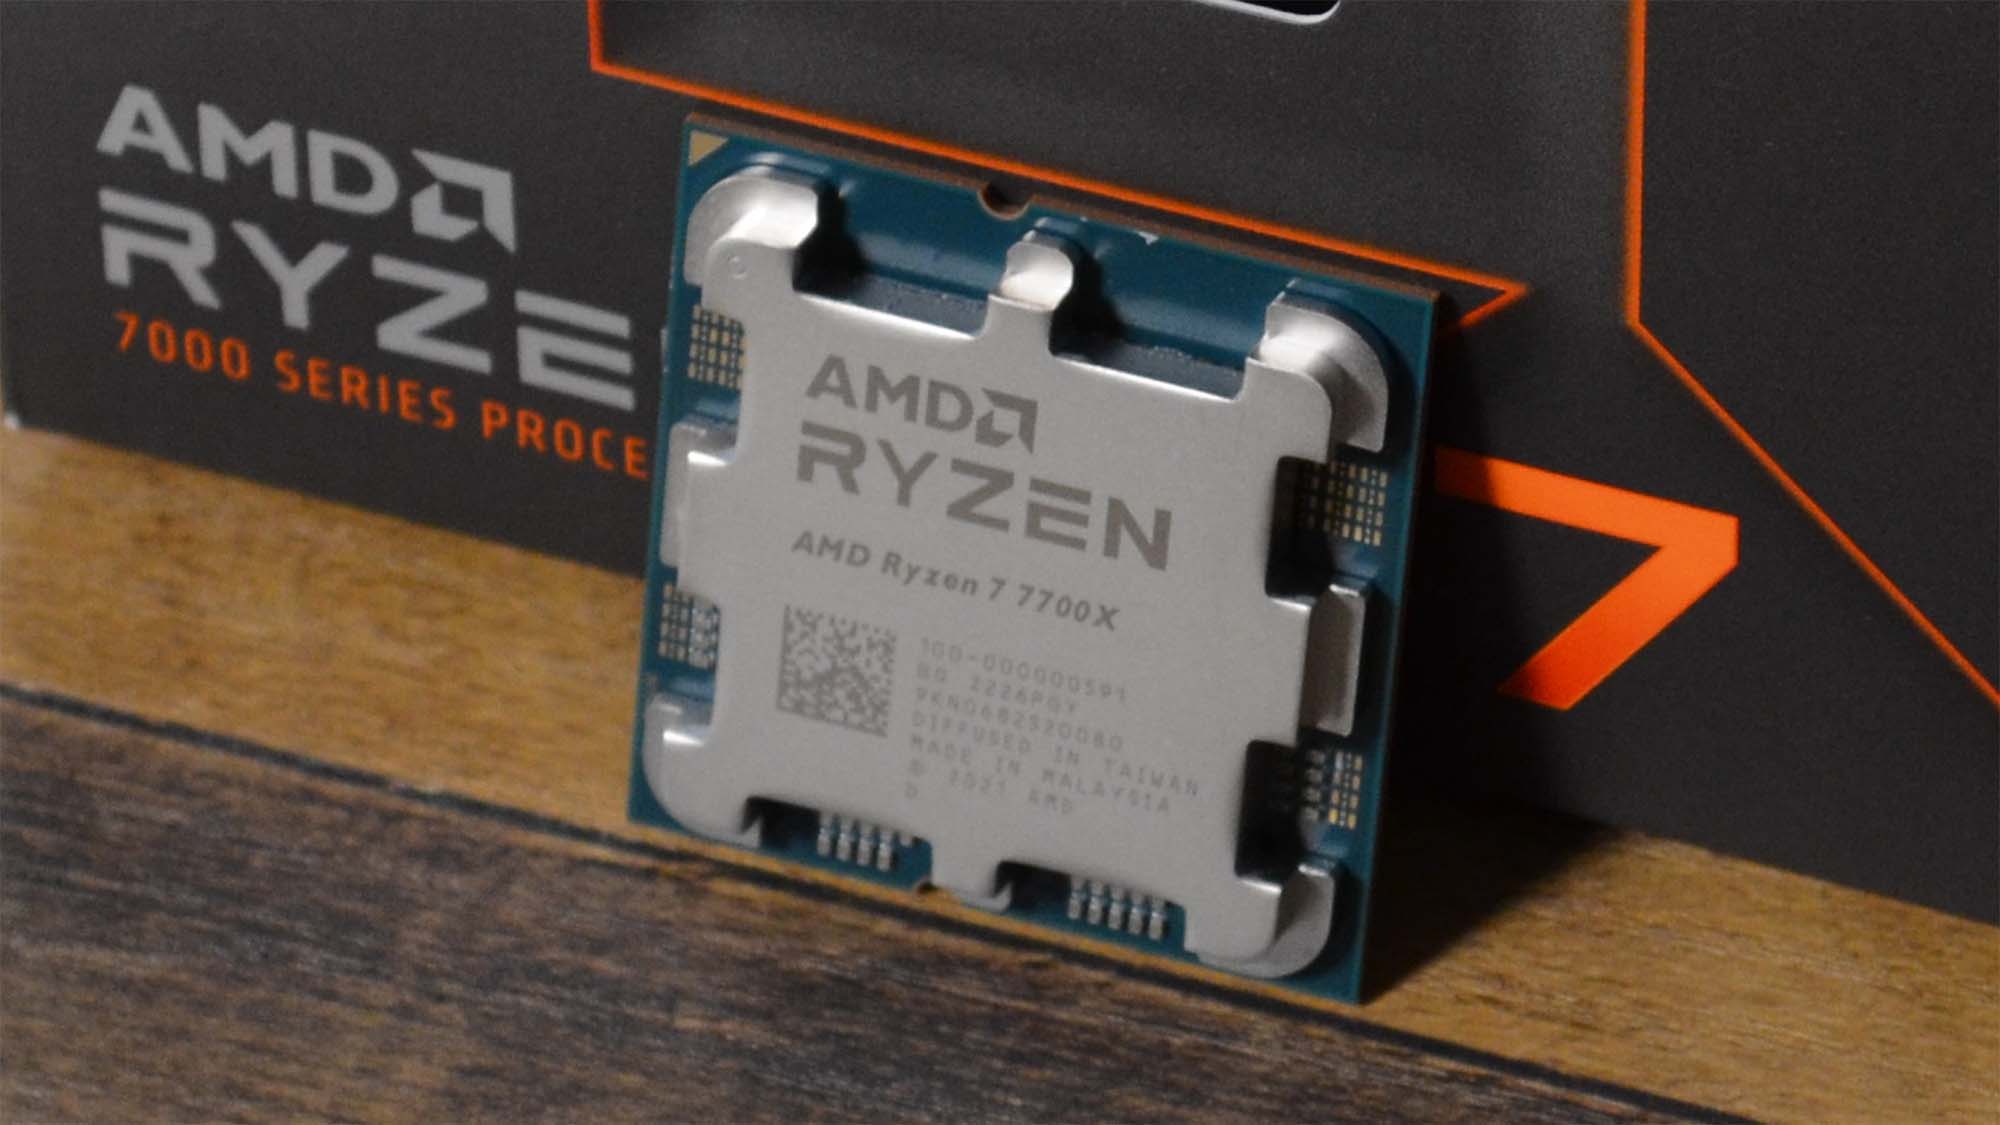 AMD Ryzen 7 7700X review: the best processor for most people ...